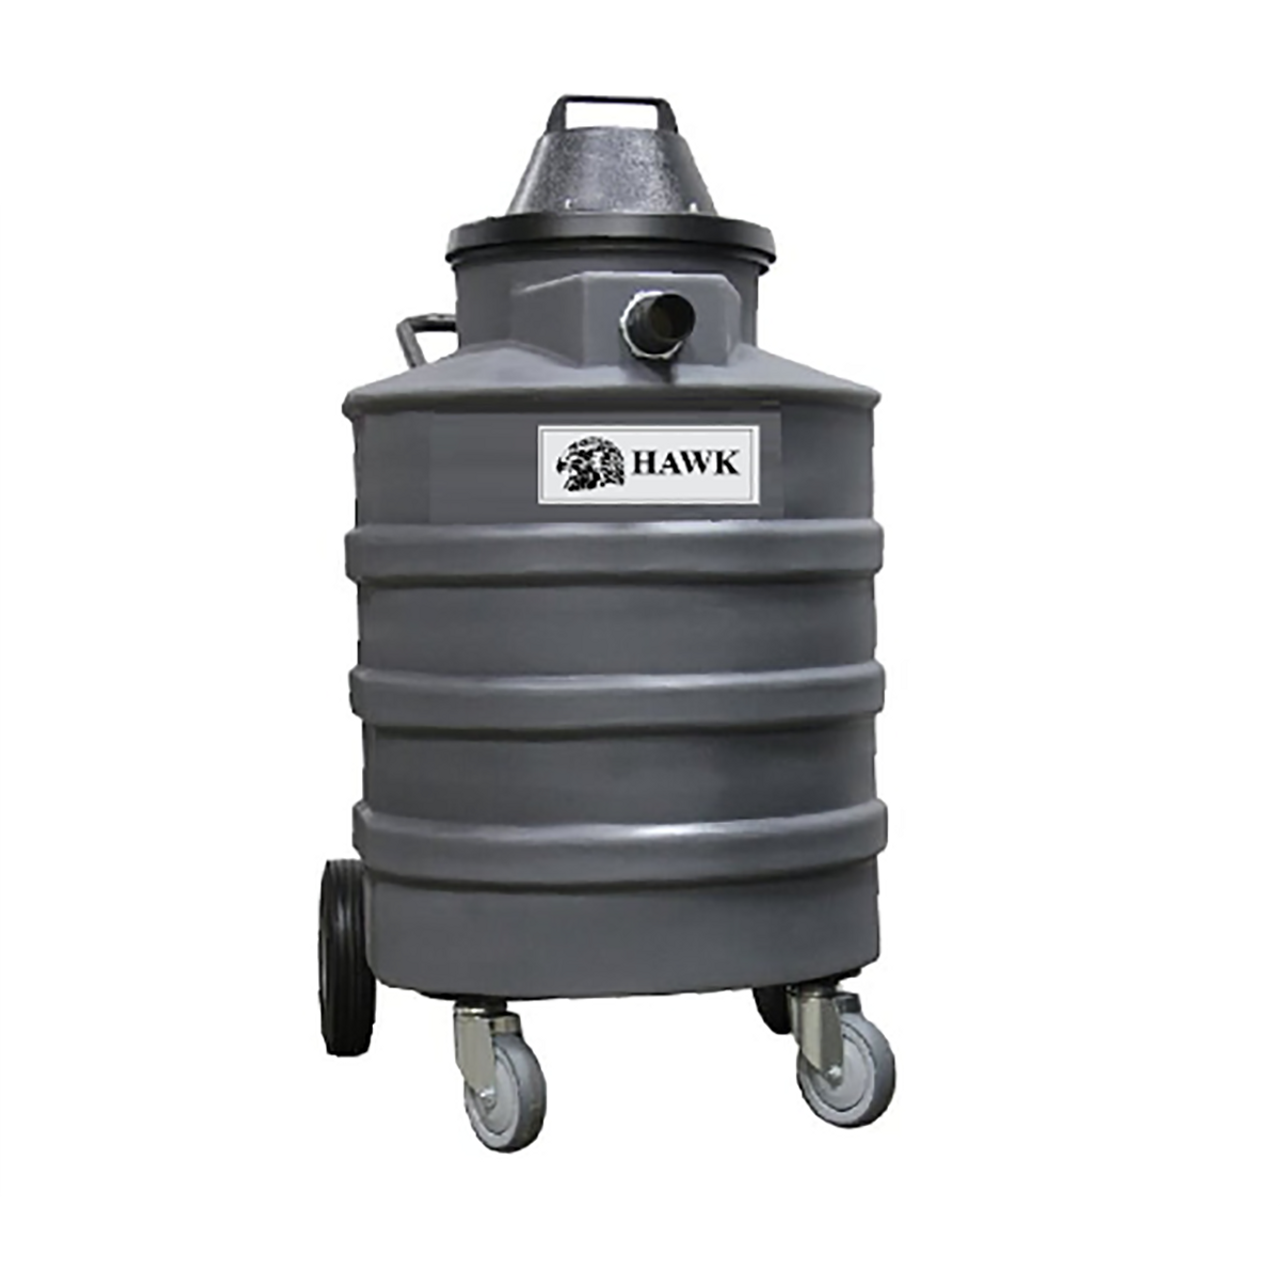 Wet/Dry Vacuum 15 Gallon With Stainless Steel Tank and Tool Kit